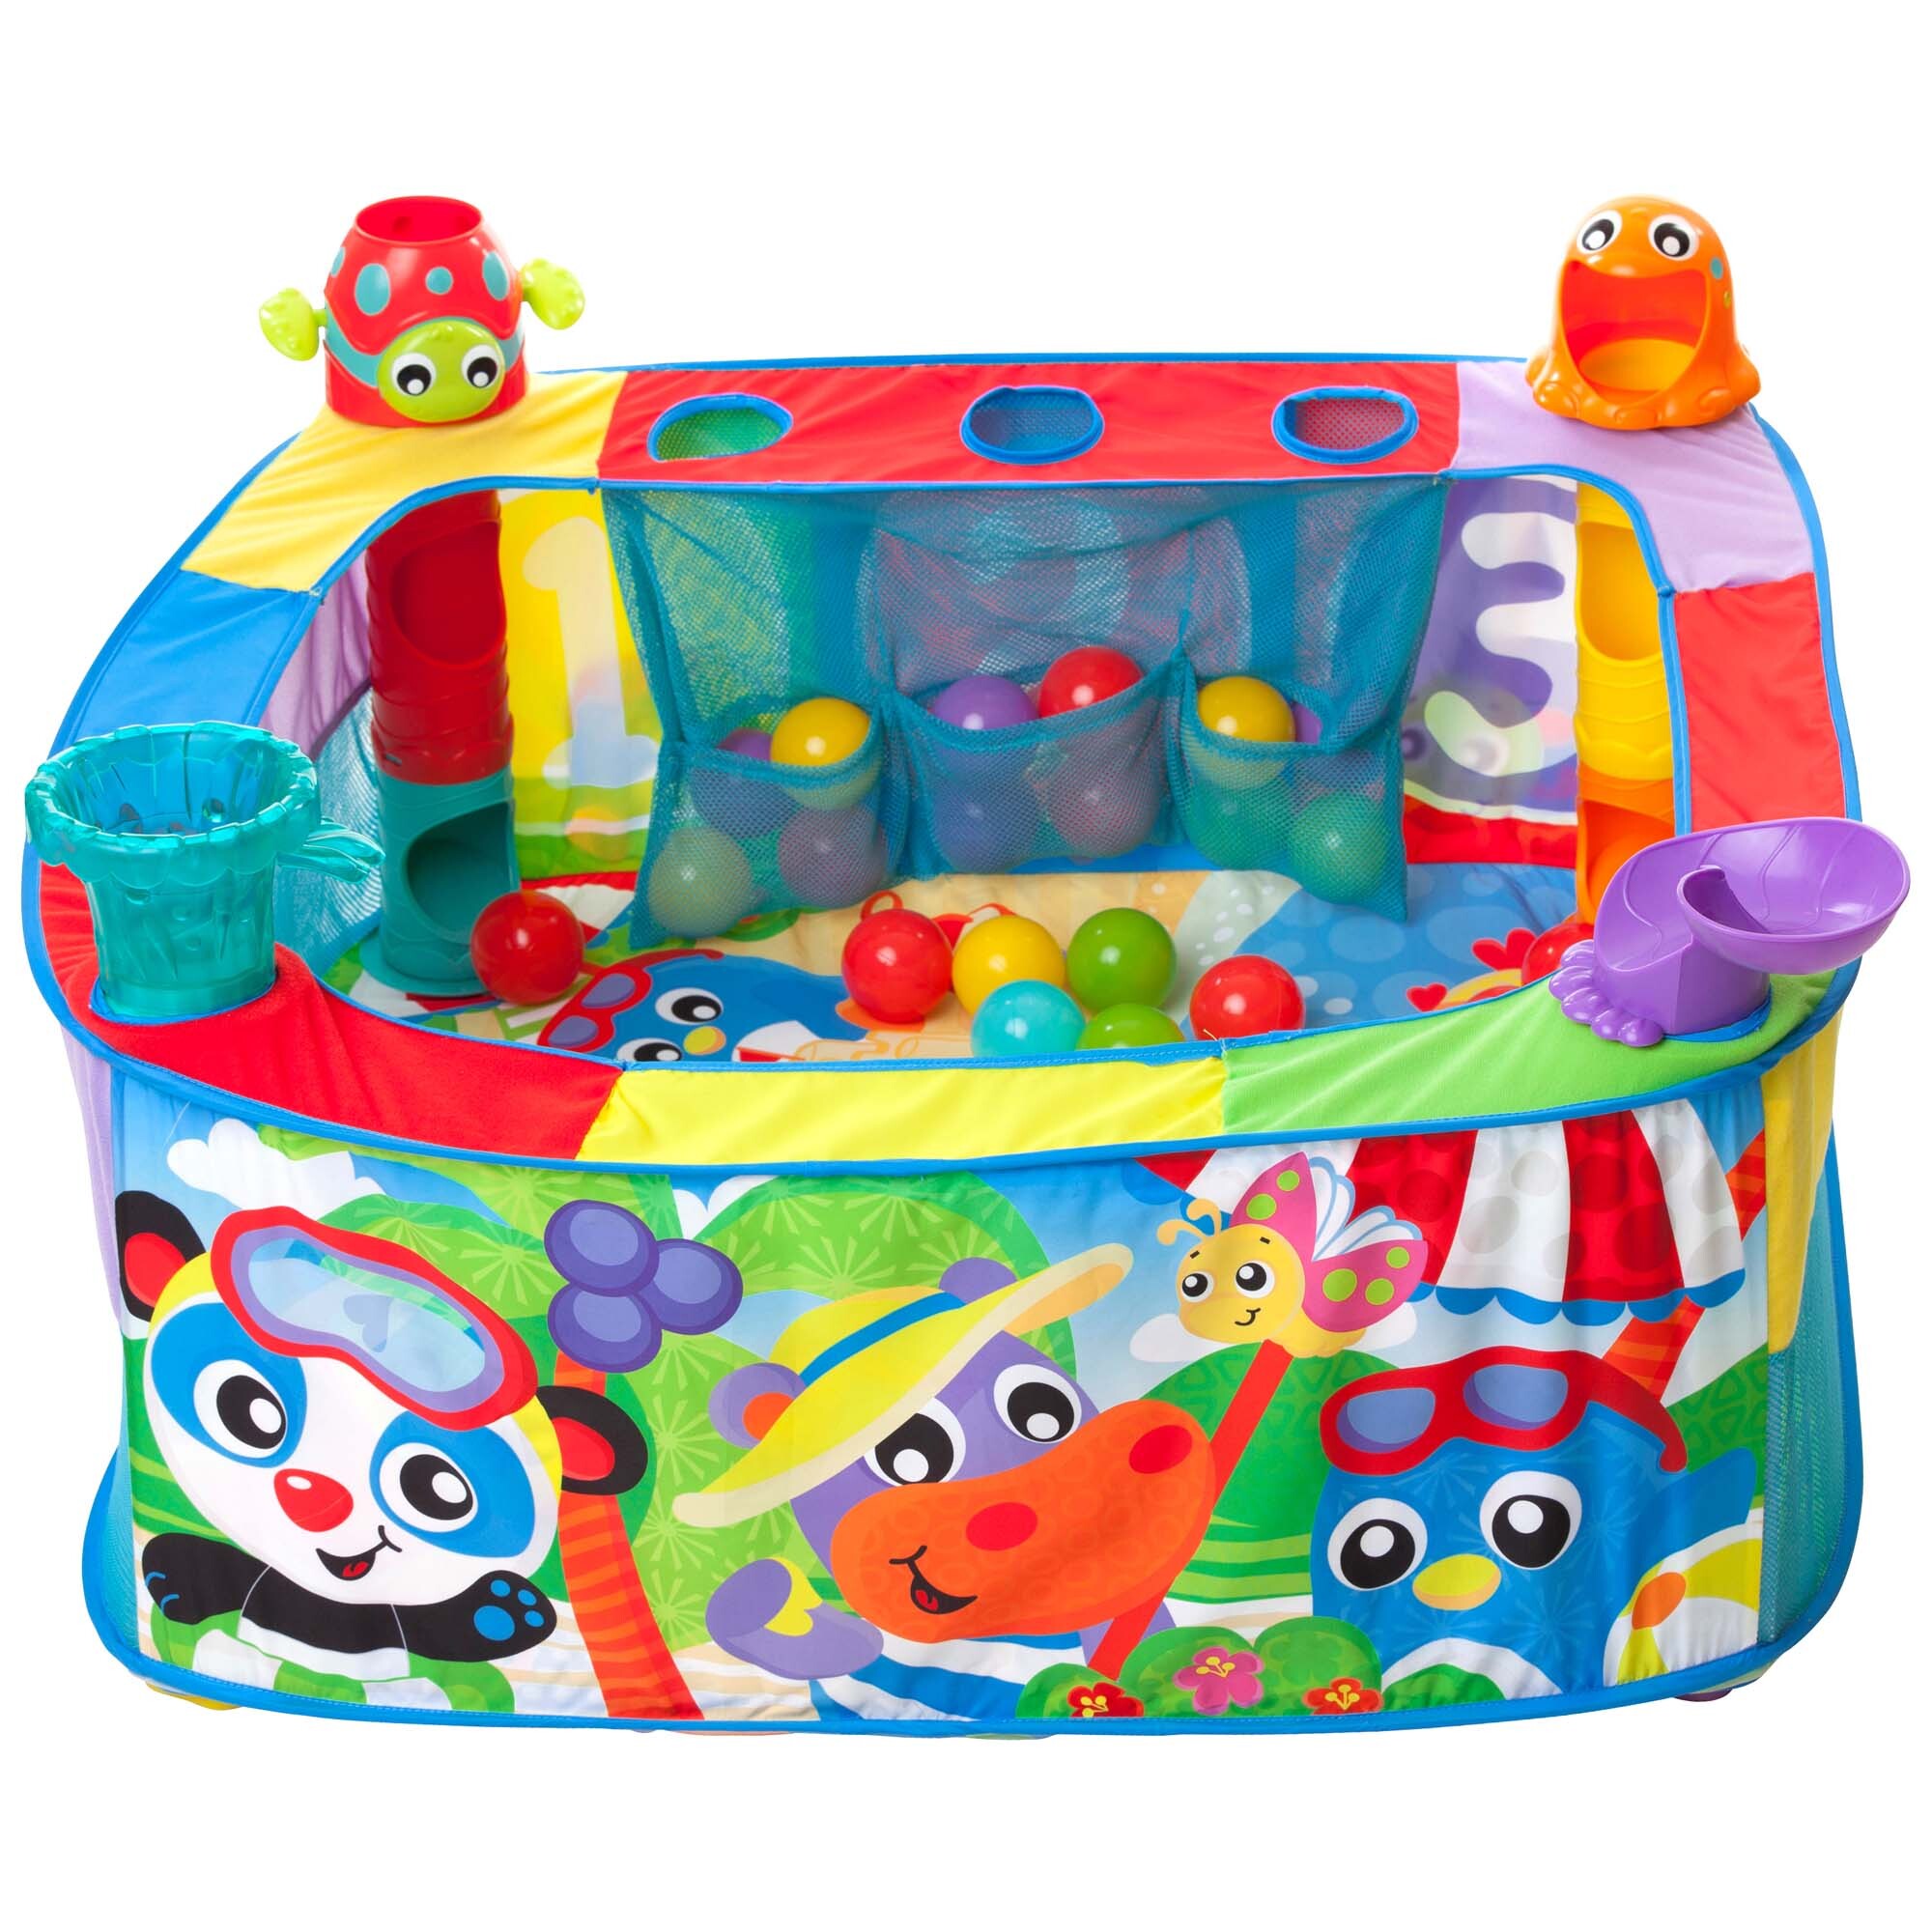 Playgro Pop and Drop activity ball gym